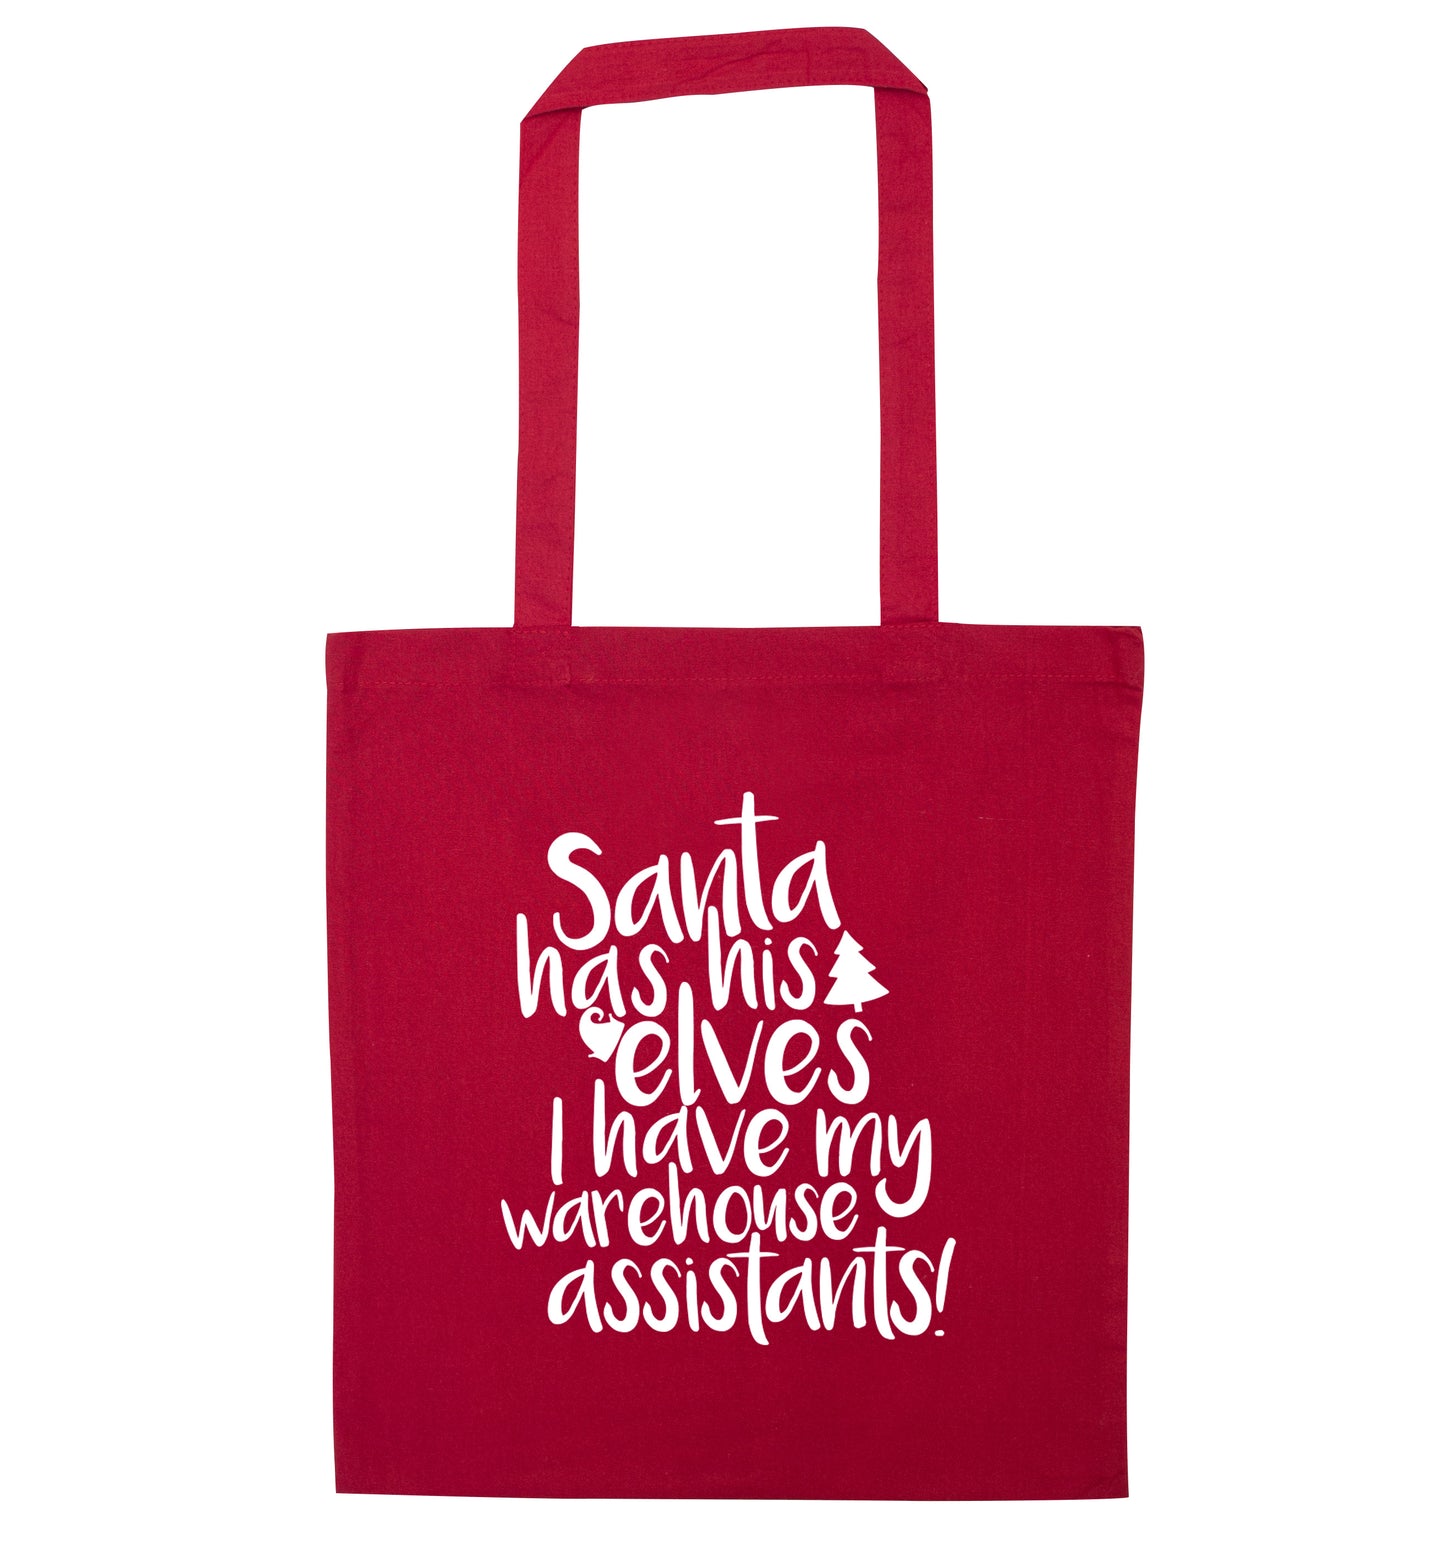 Santa has his elves I have my warehouse assistants red tote bag